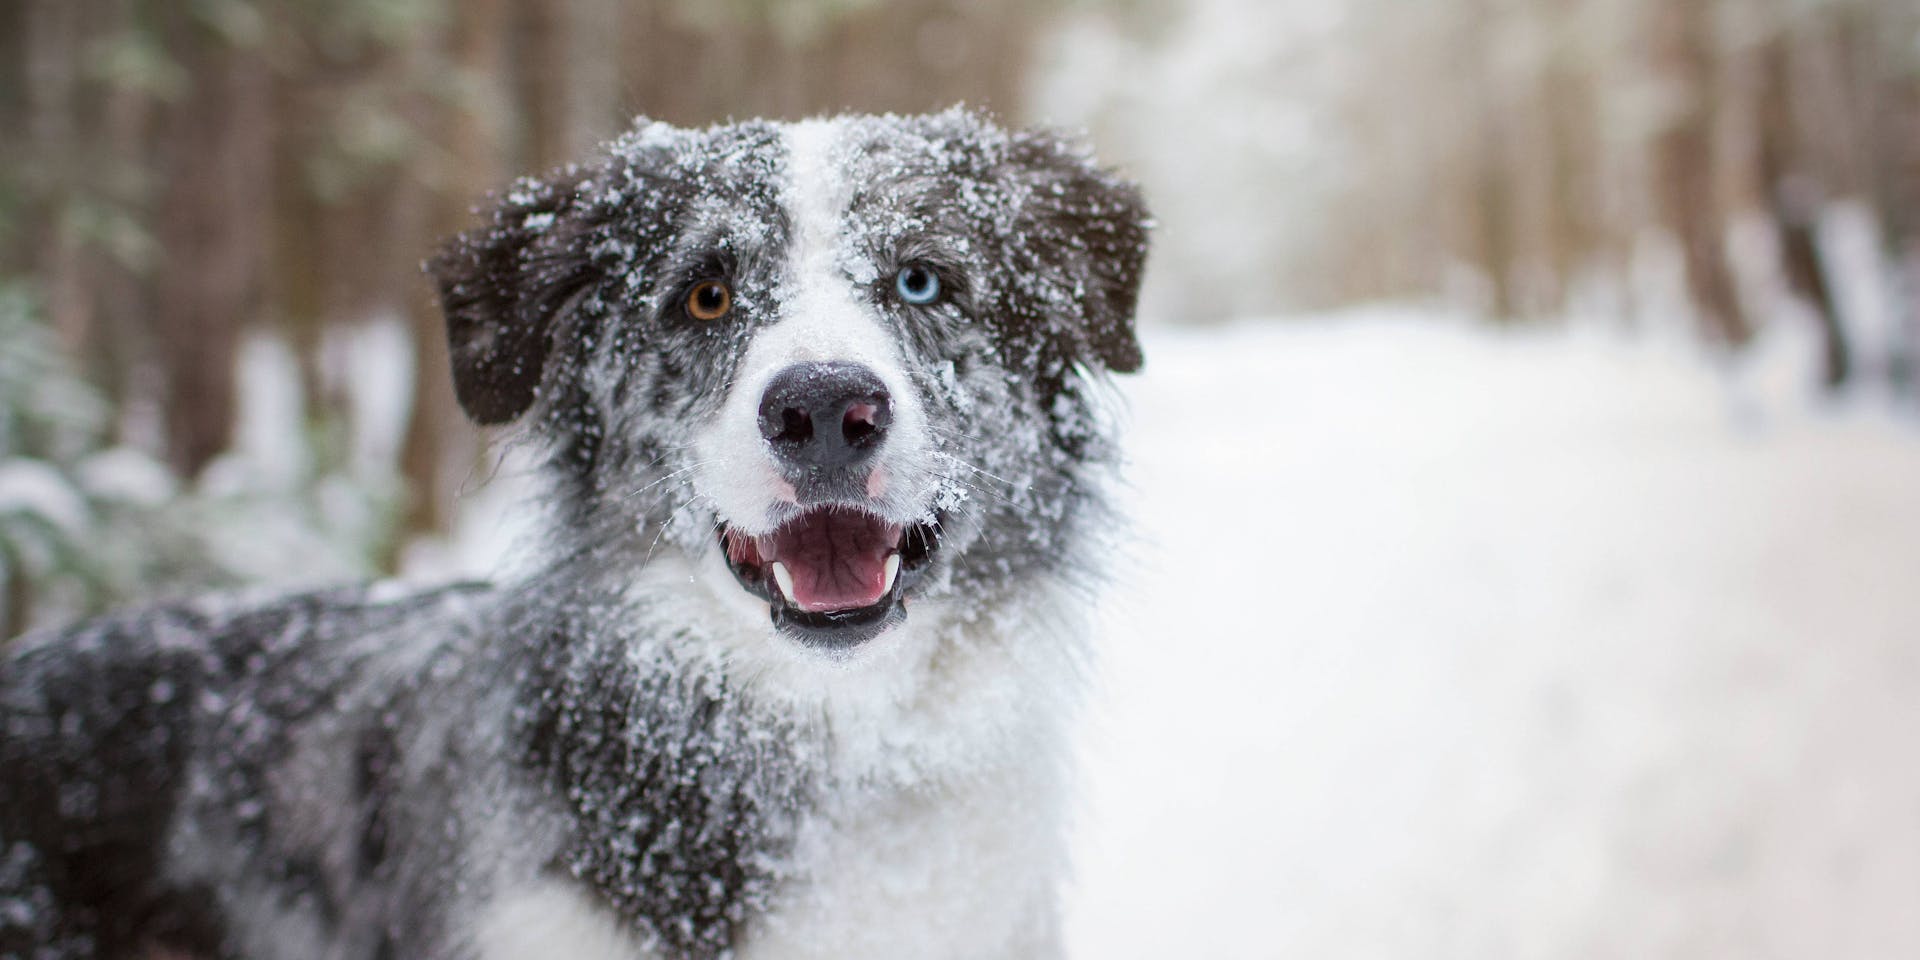 Dog in a snowy, winter setting.